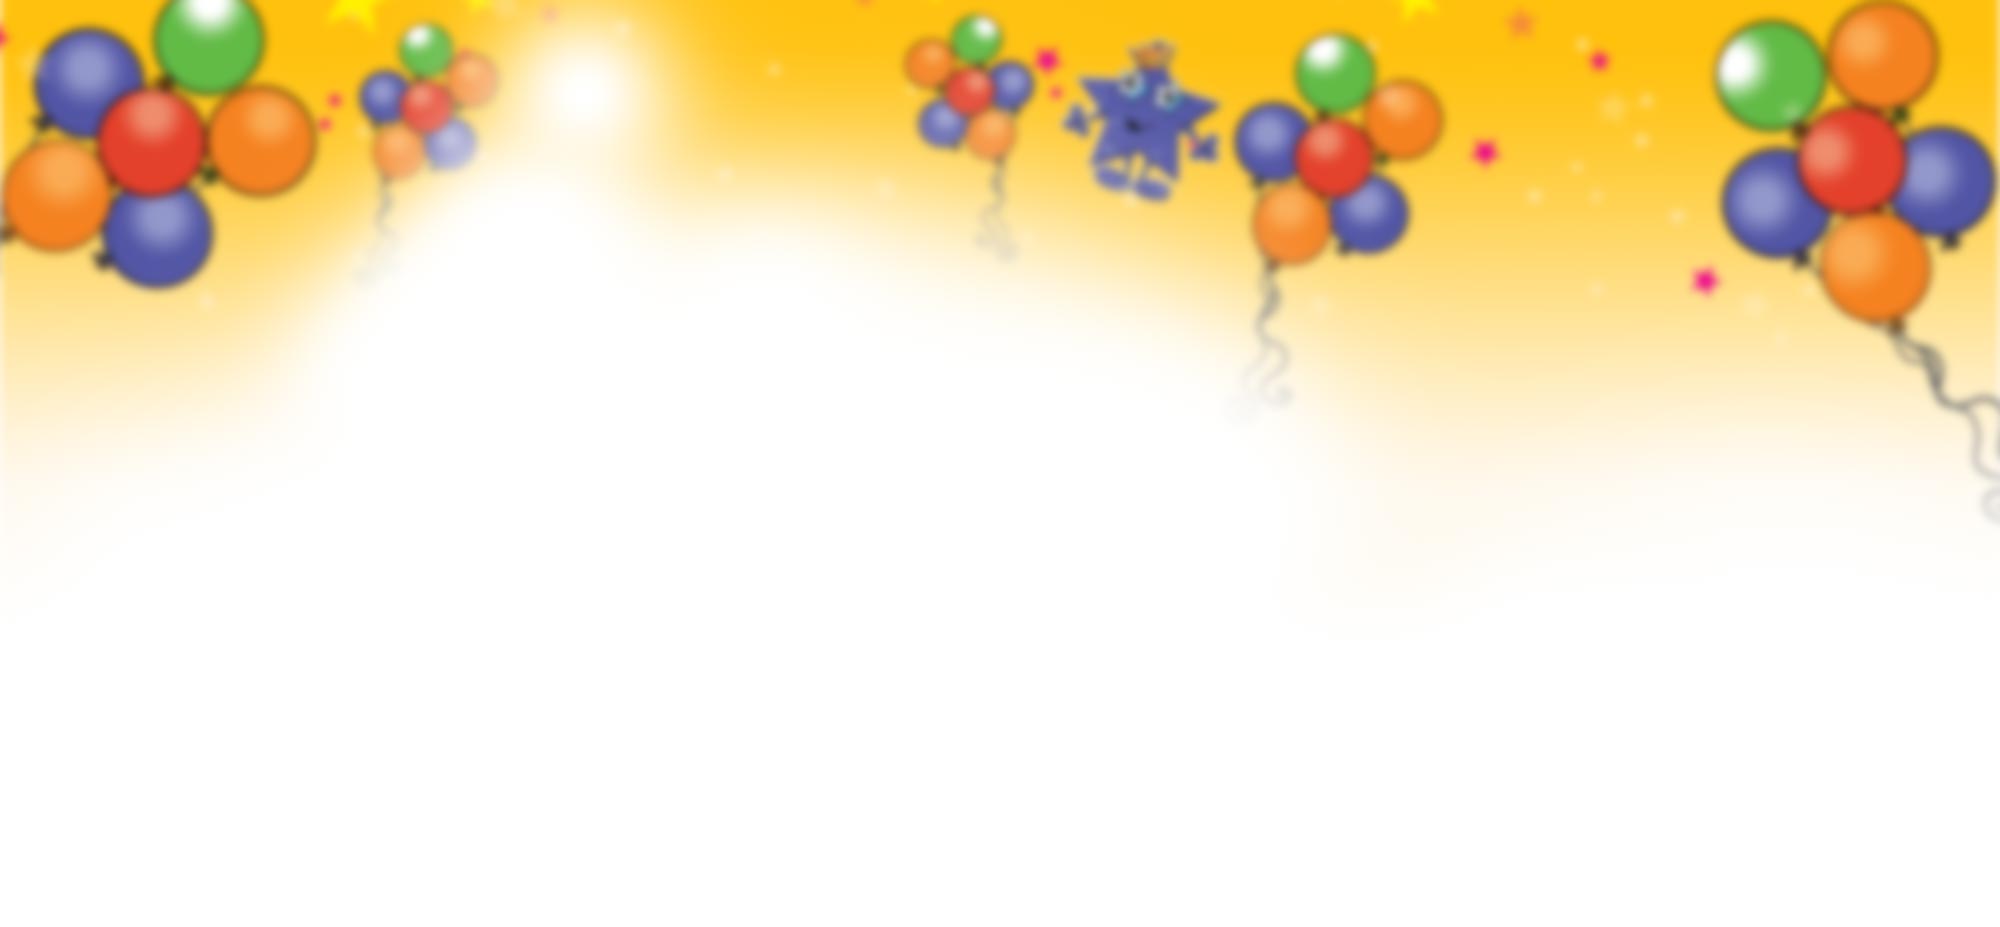 Thumb Image - Birthday Party Theme Background - HD Wallpaper 